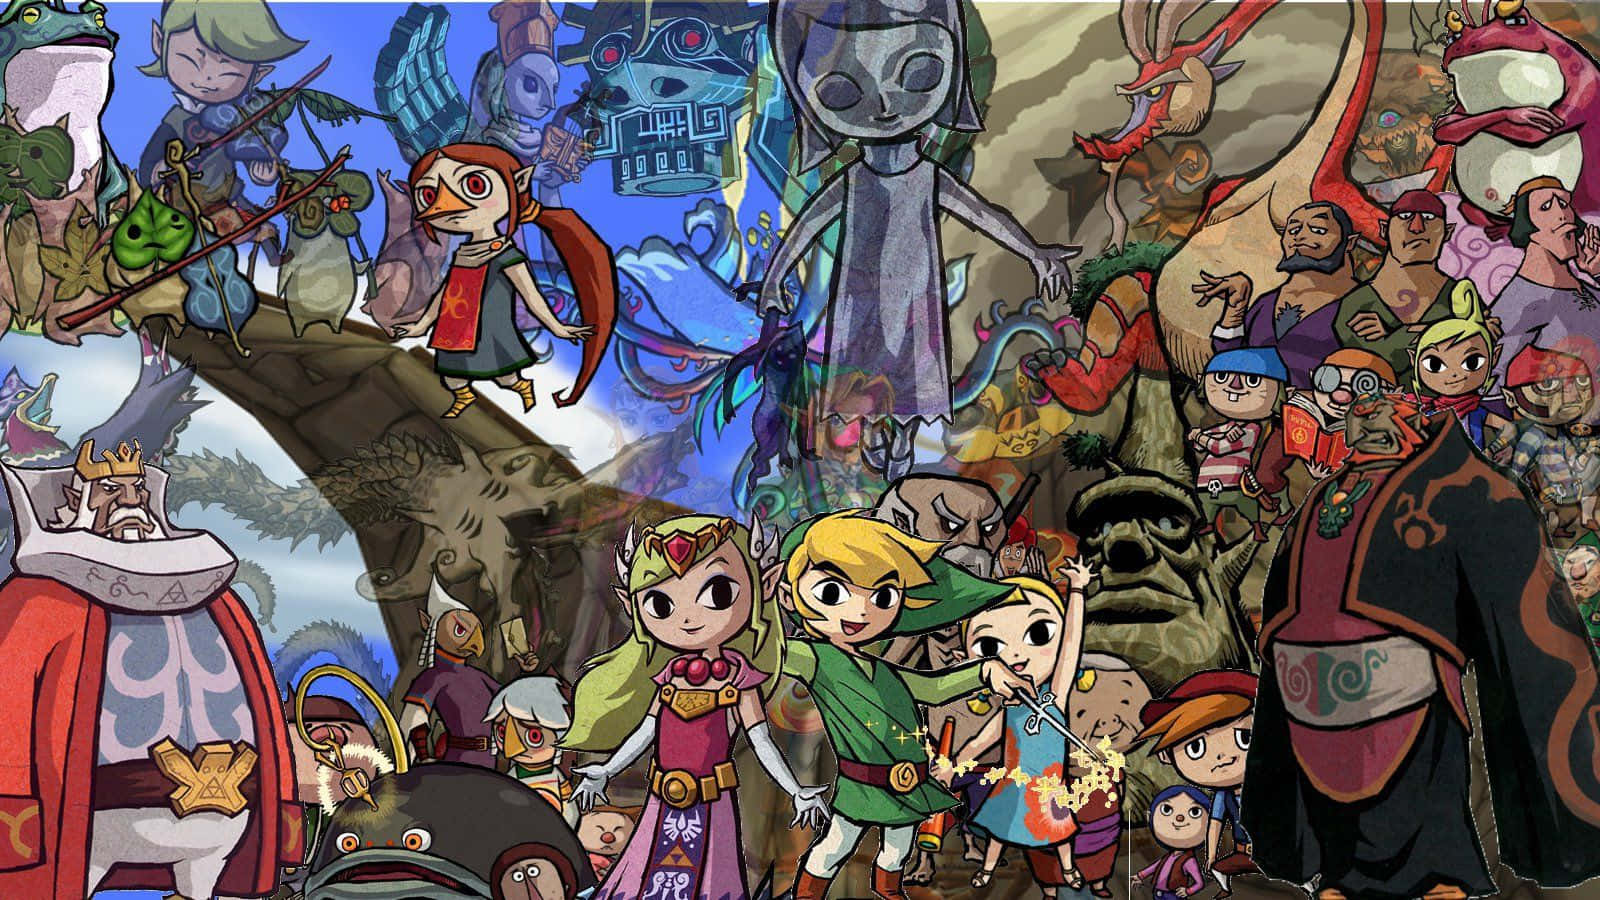 The Legend of Zelda: The Wind Waker – Link setting sail on the Great Sea Wallpaper